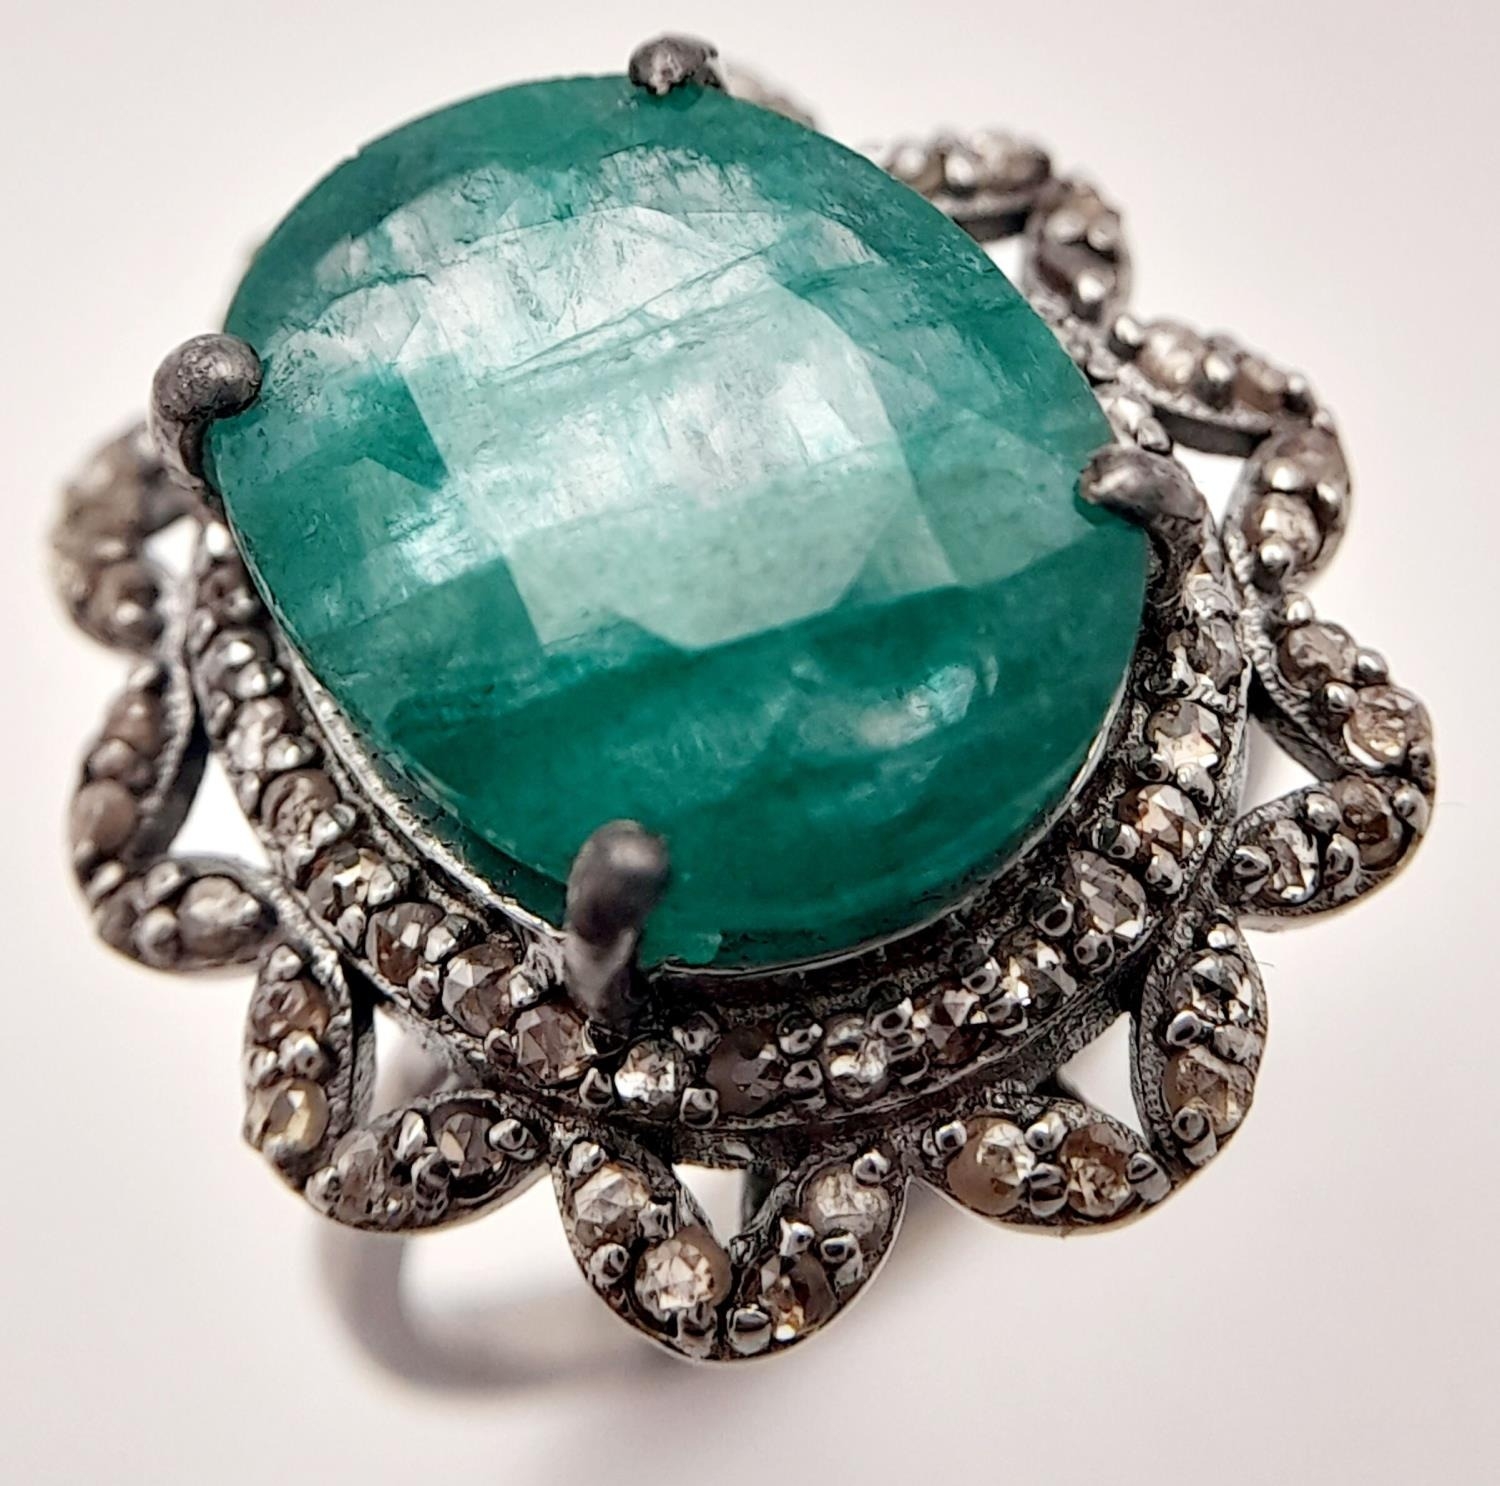 A 6.15ct Emerald Ring with 0.75ctw of Diamond Accents. Set in 925 Silver. Size N. Comes with a